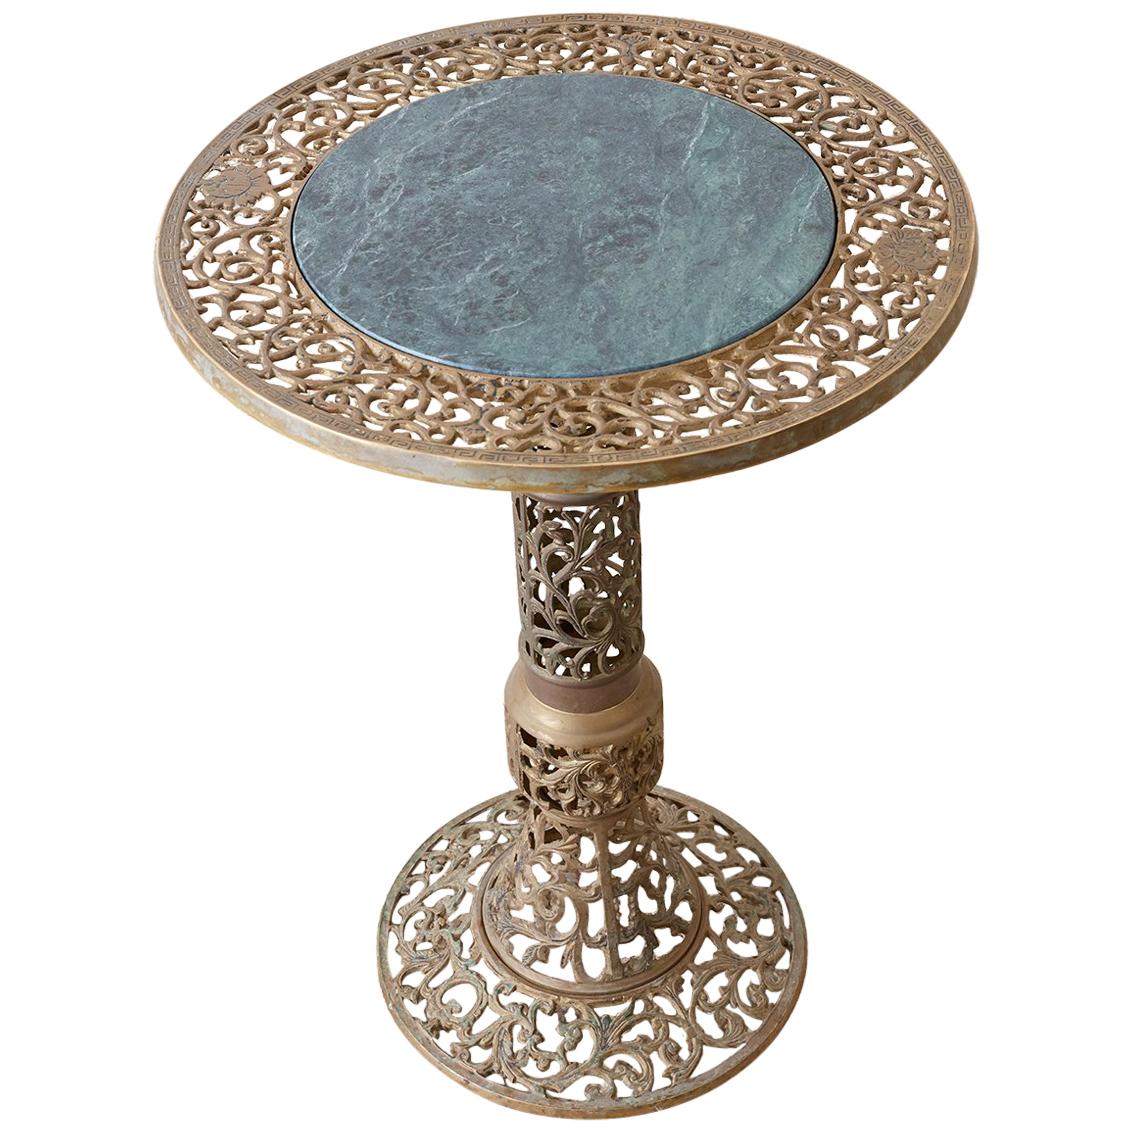 Stunning Chinese brass drinks table featuring a green marble top. The entire body of the piece is decorated with a pierced or reticulated open fretwork pattern in a vine and foliate motif. Round top and base conjoined by a thick column. Originally a